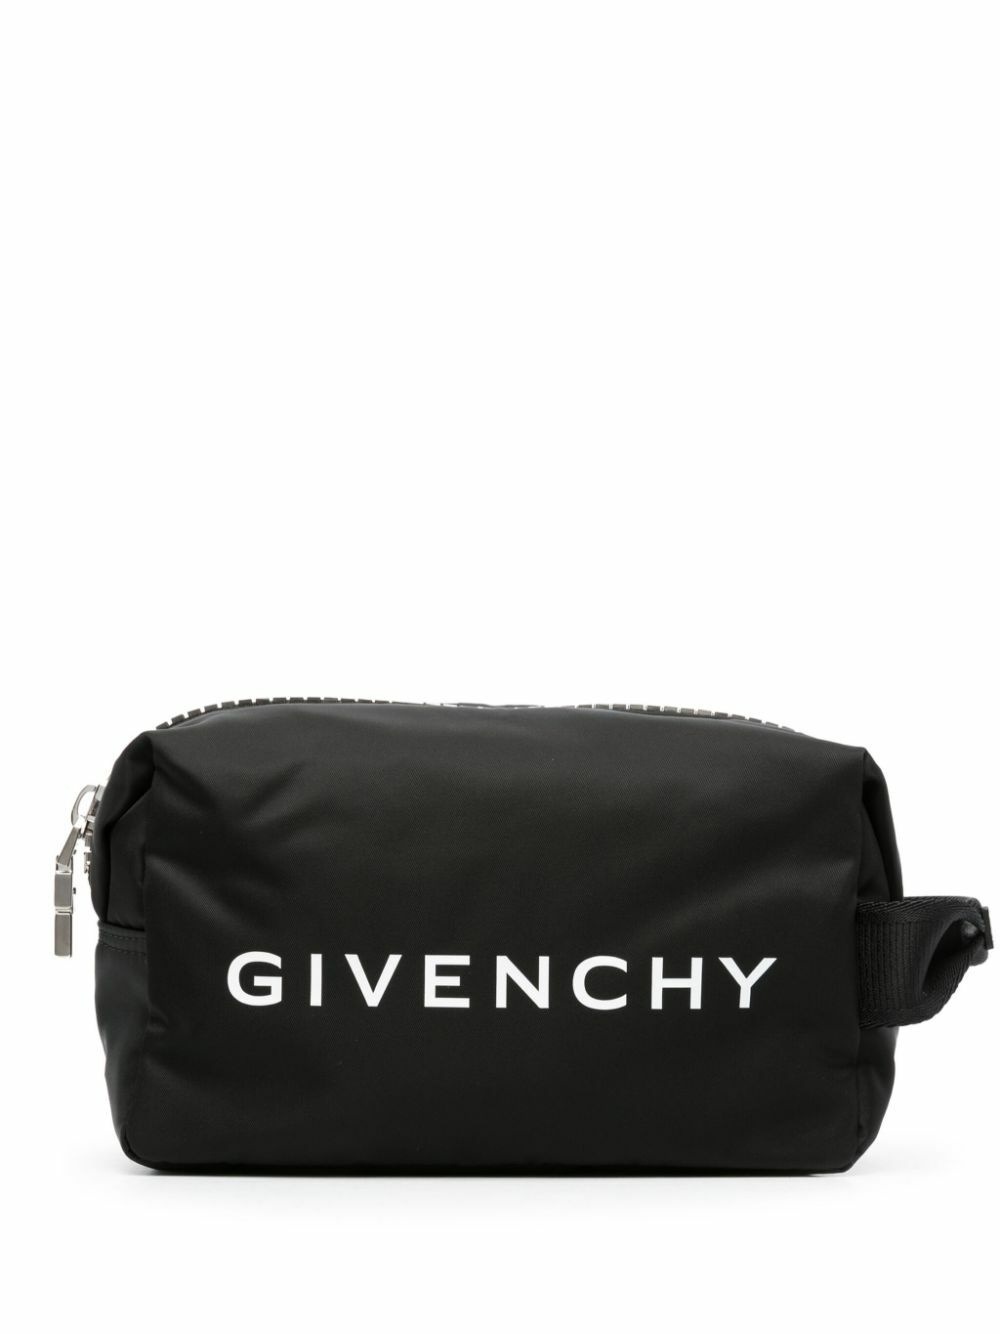 GIVENCHY - G-zip Nylon Pouch Givenchy